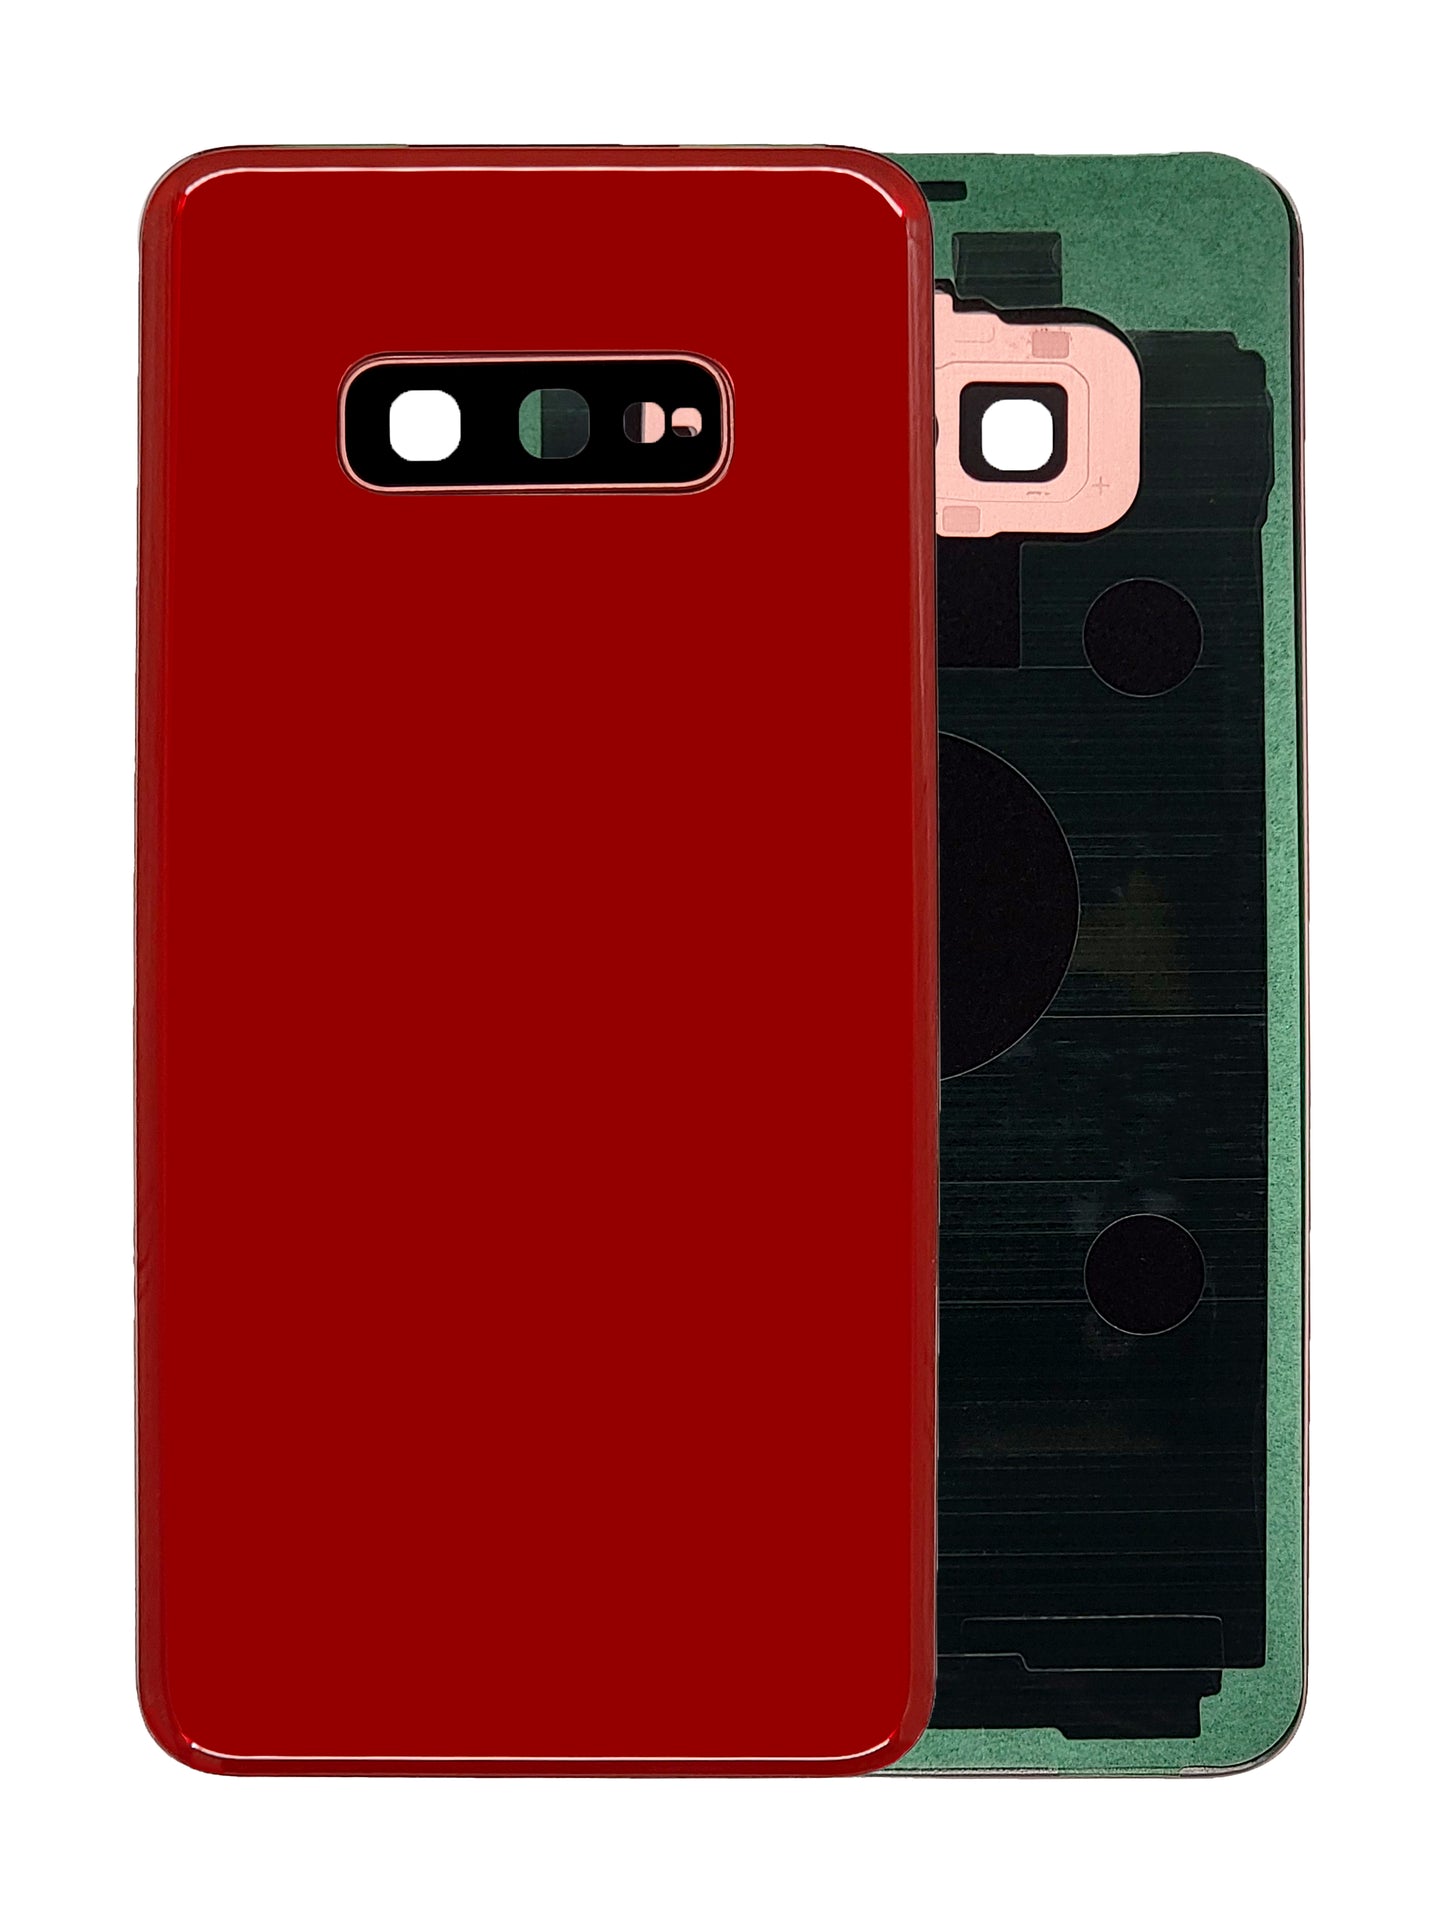 SGS S10e Back Cover (Red)